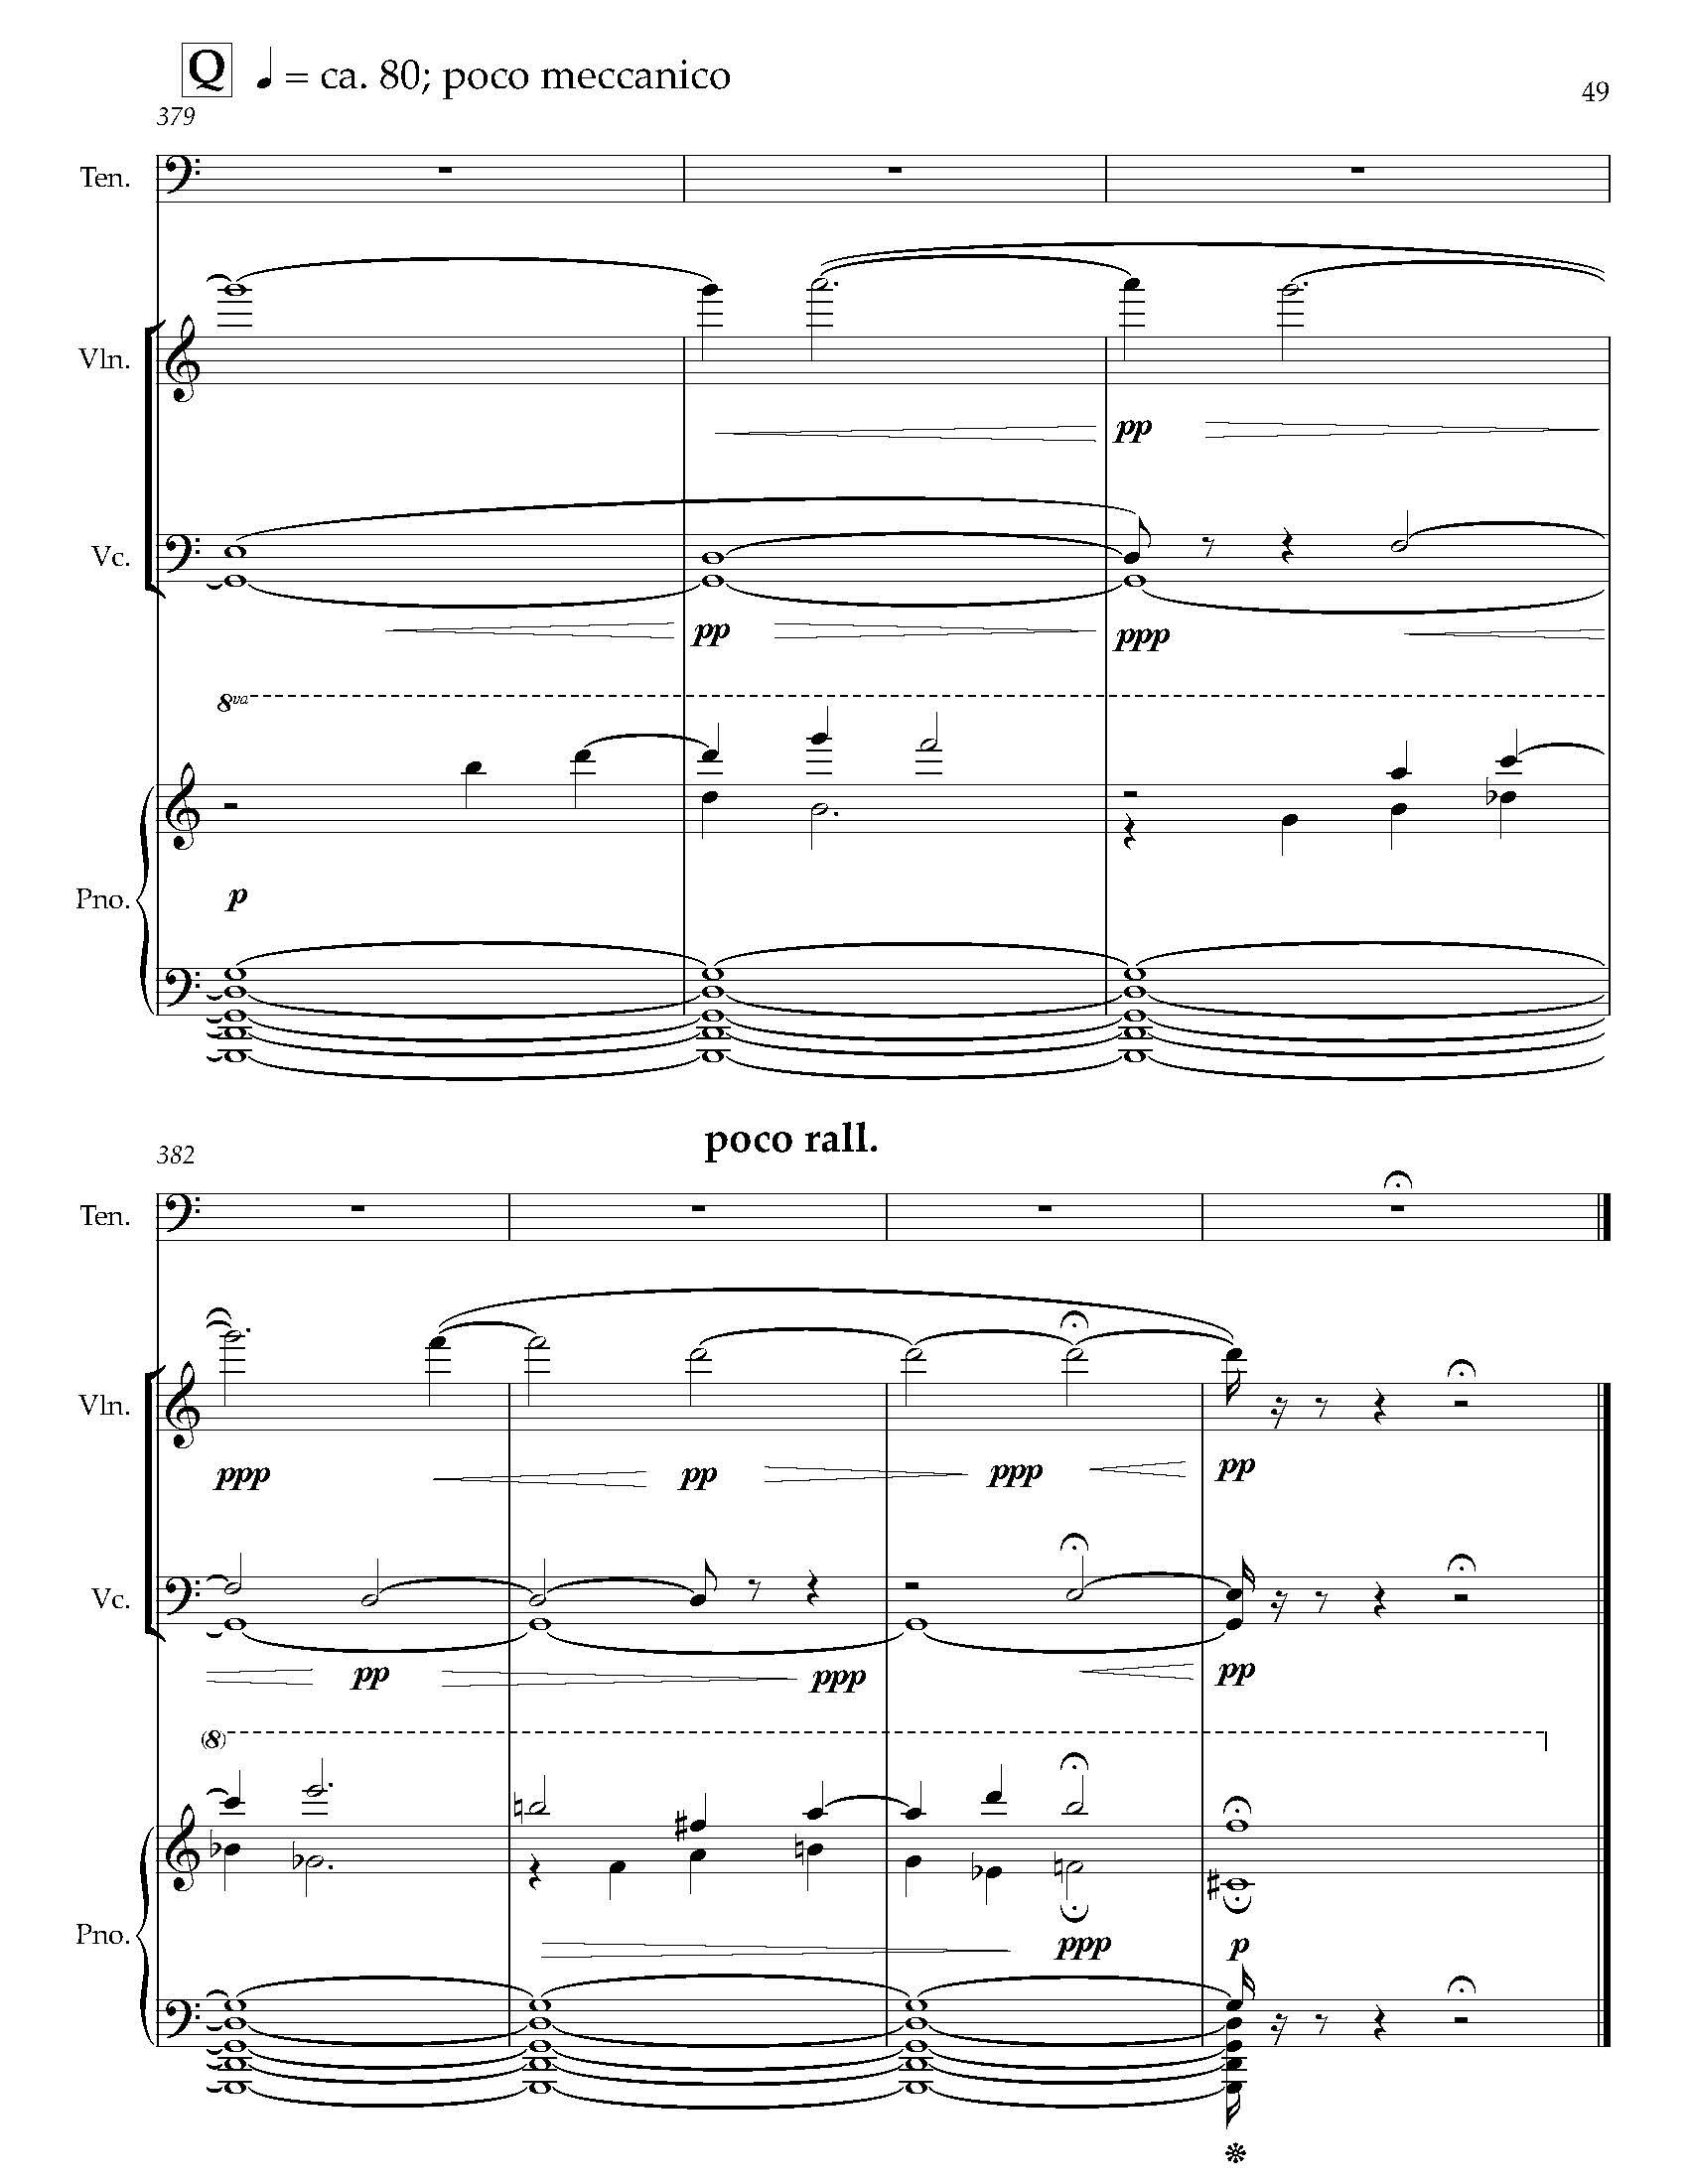 Gursky Songs - Complete Score_Page_57.jpg